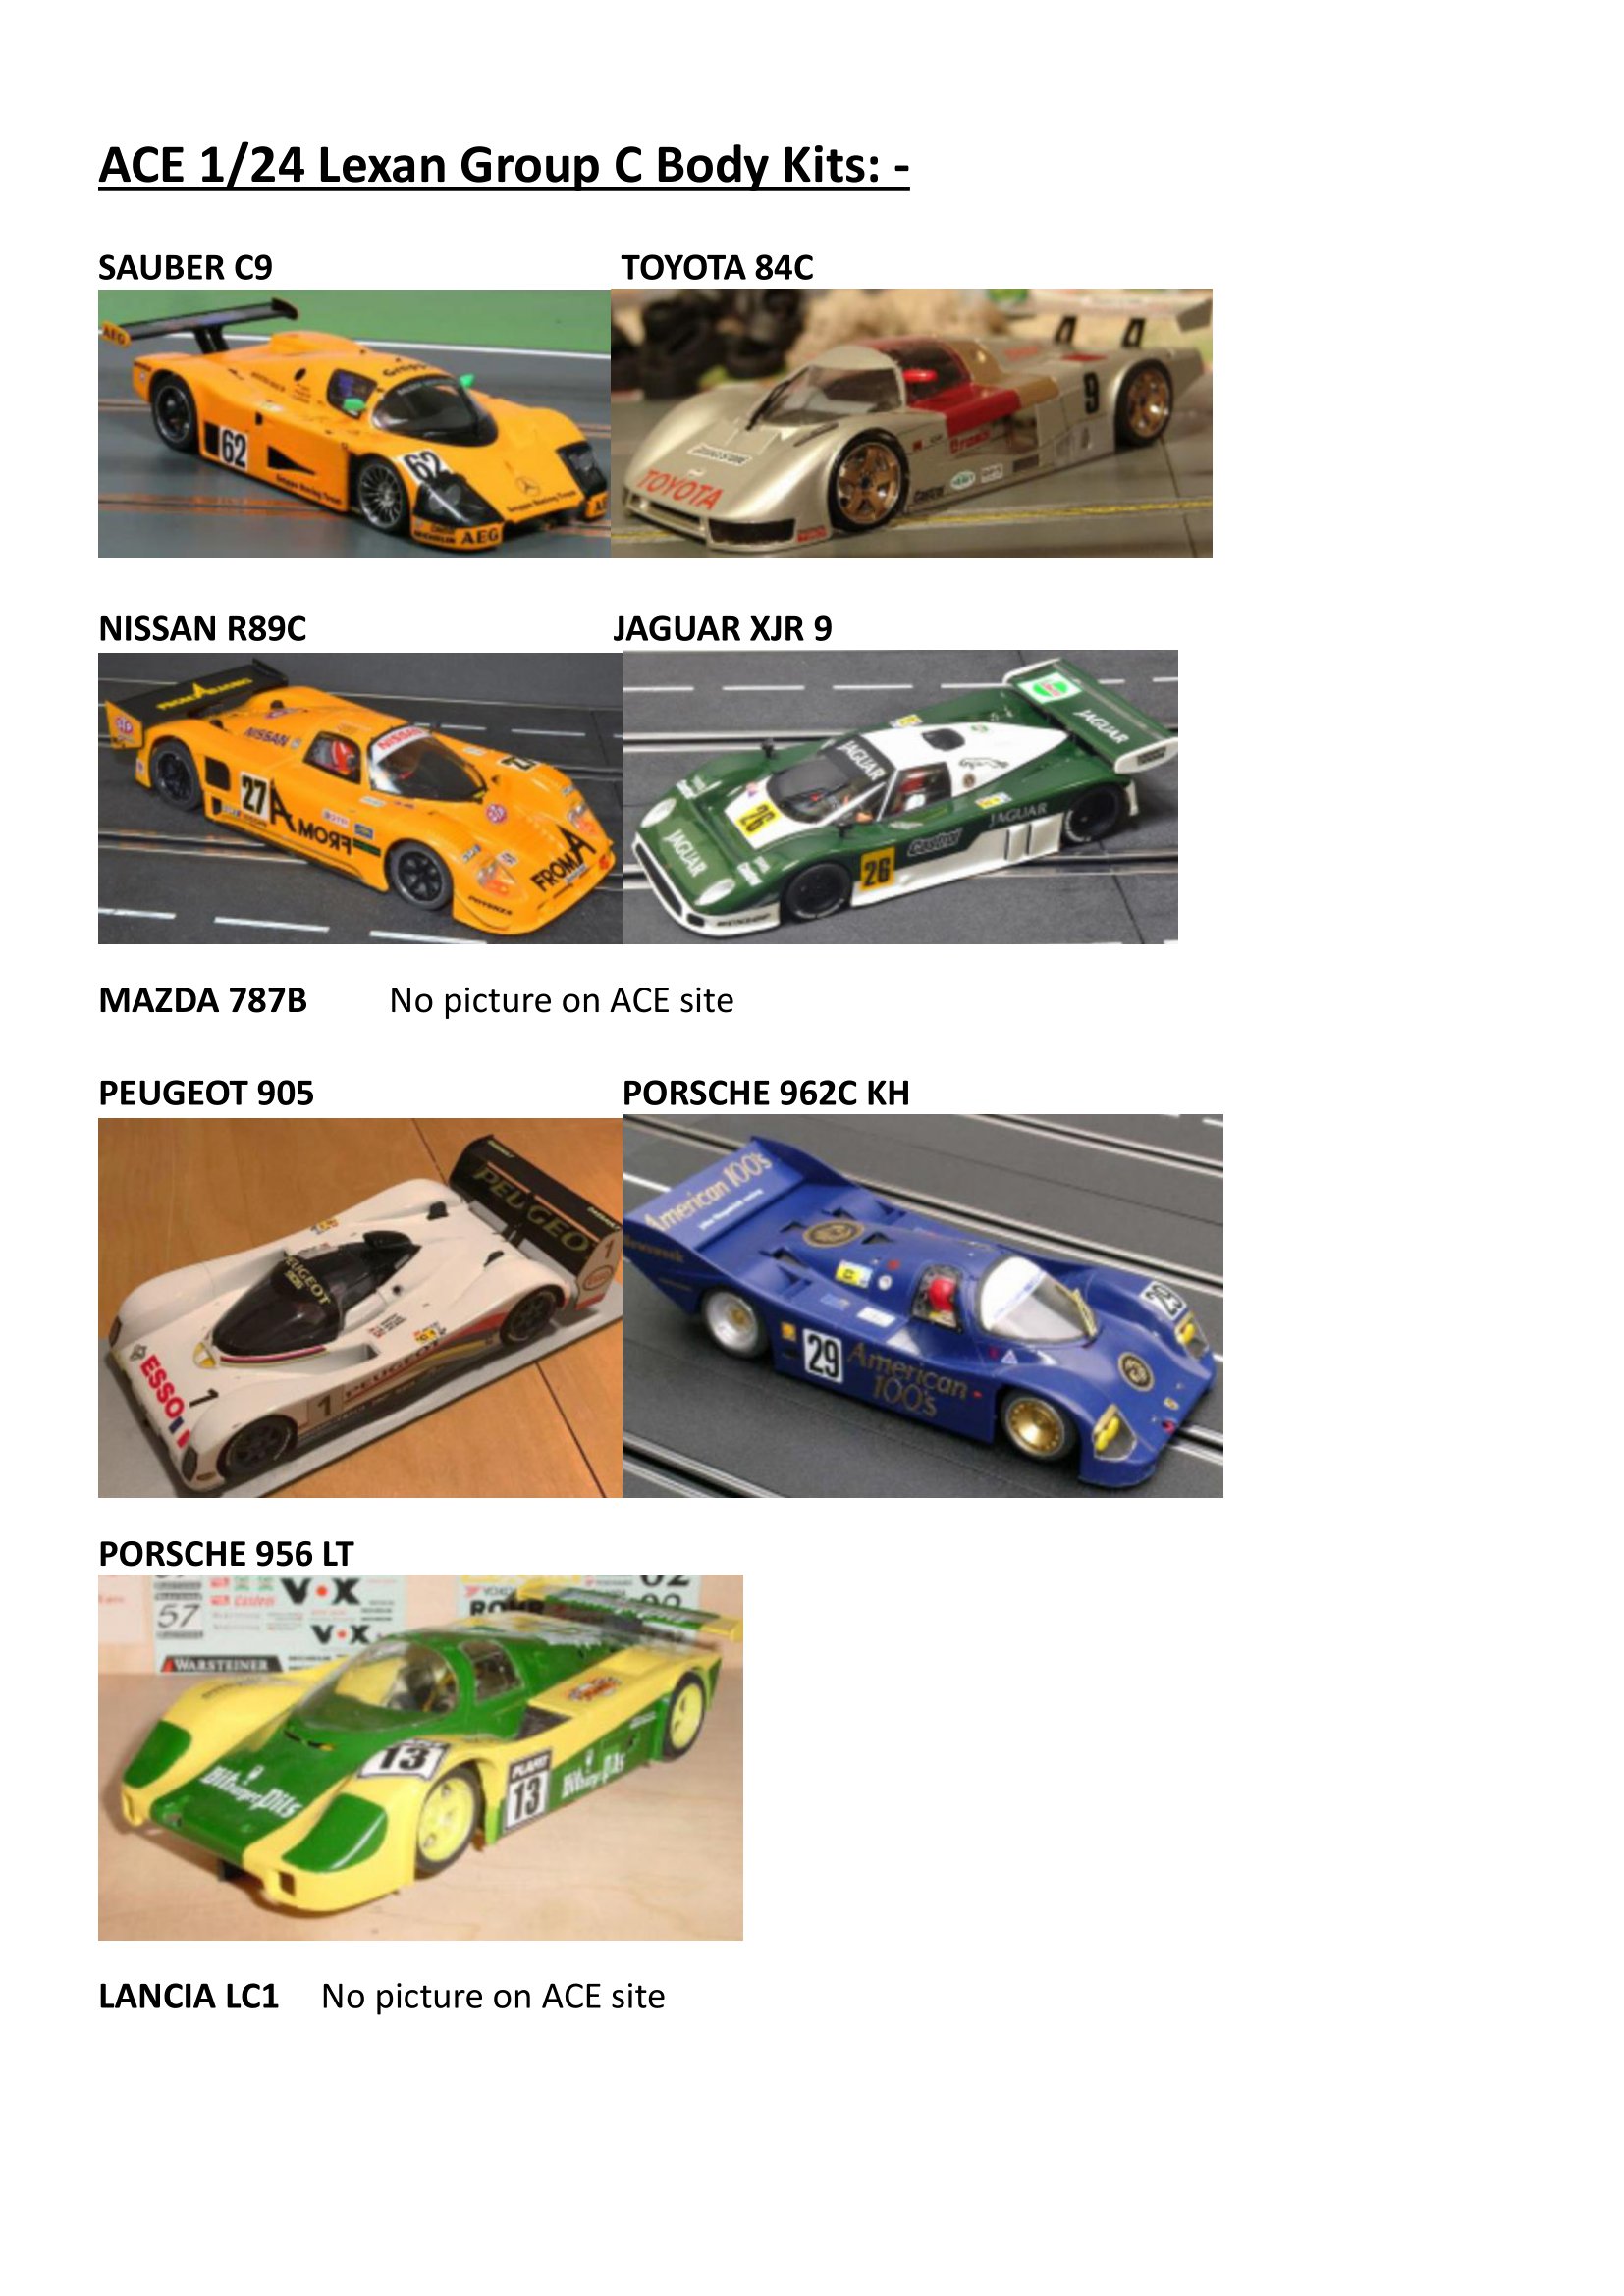 LEXAN Group C (With Body Images) - Feb 2023 Regs-3.jpg